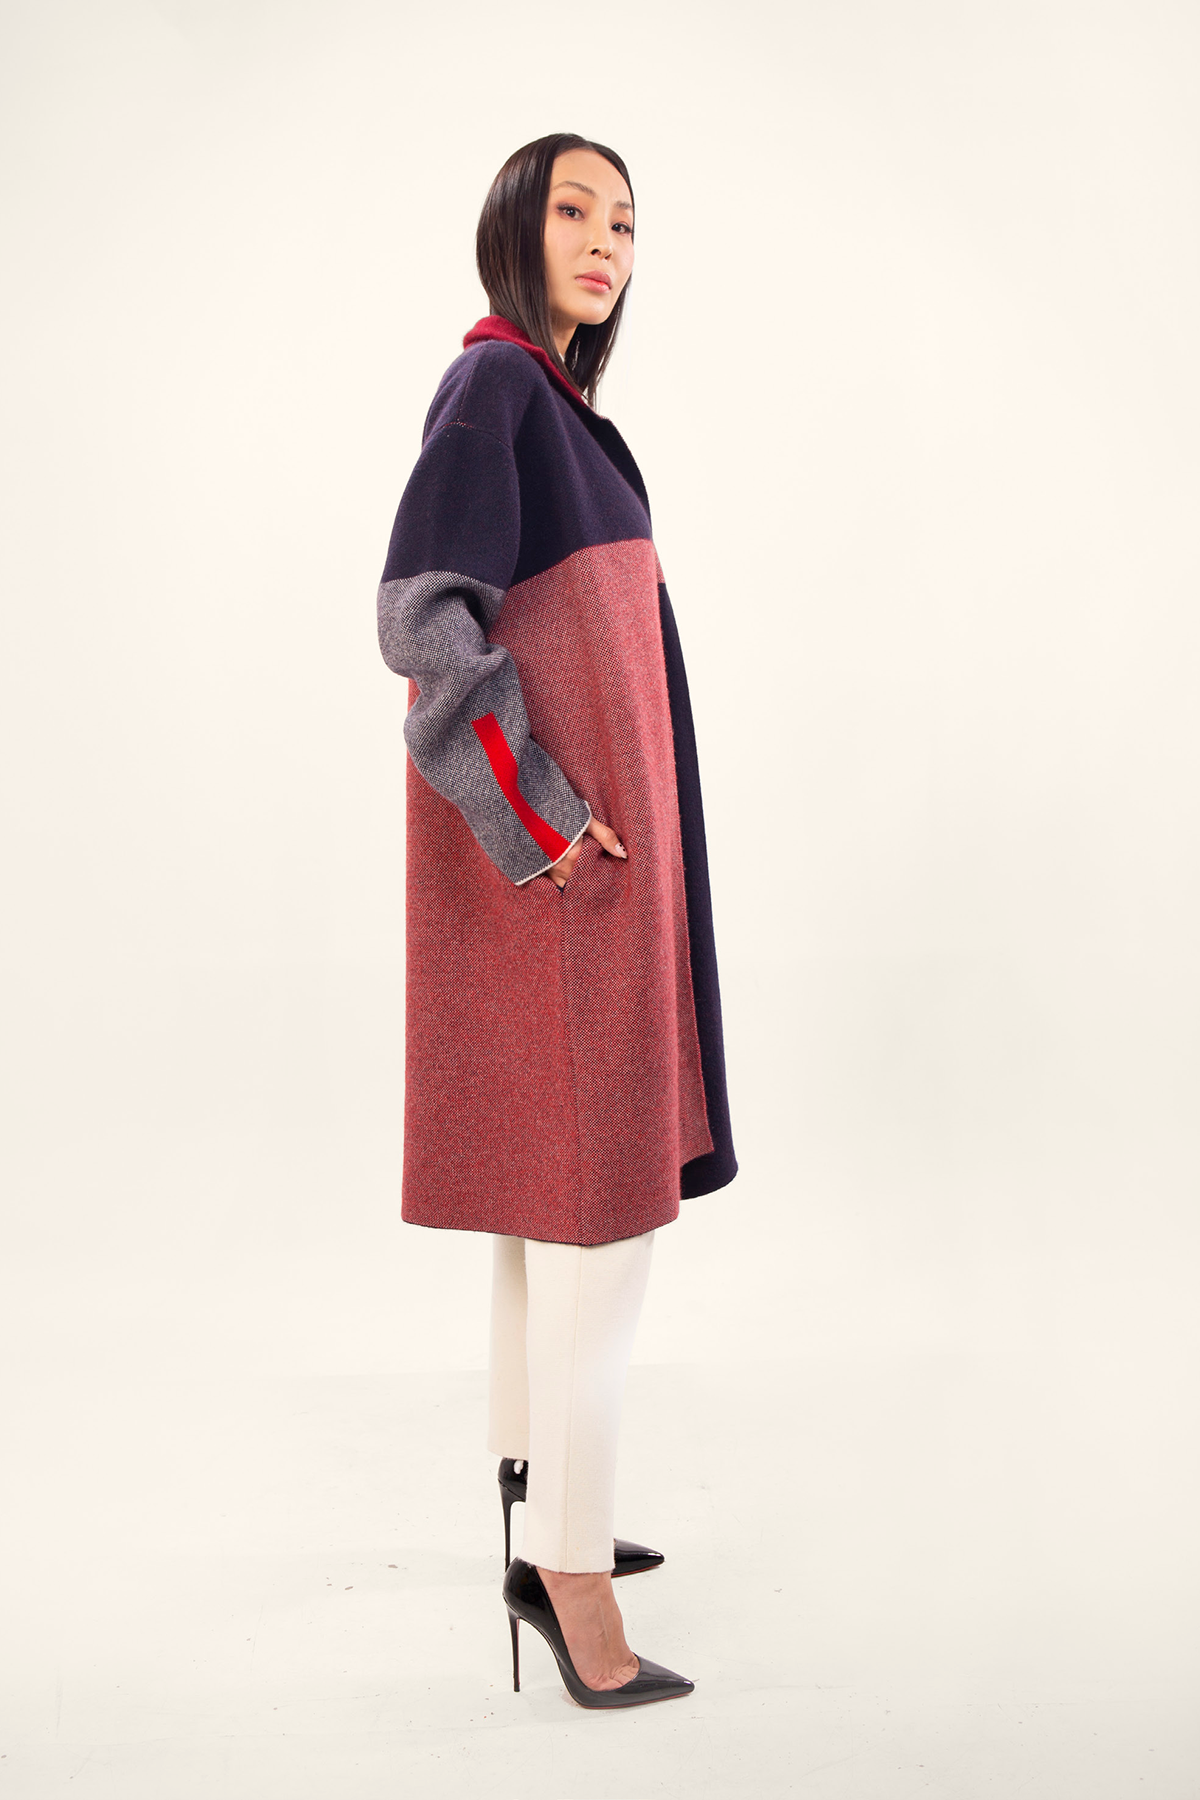 Purple and Red Boho Cashmere Coat